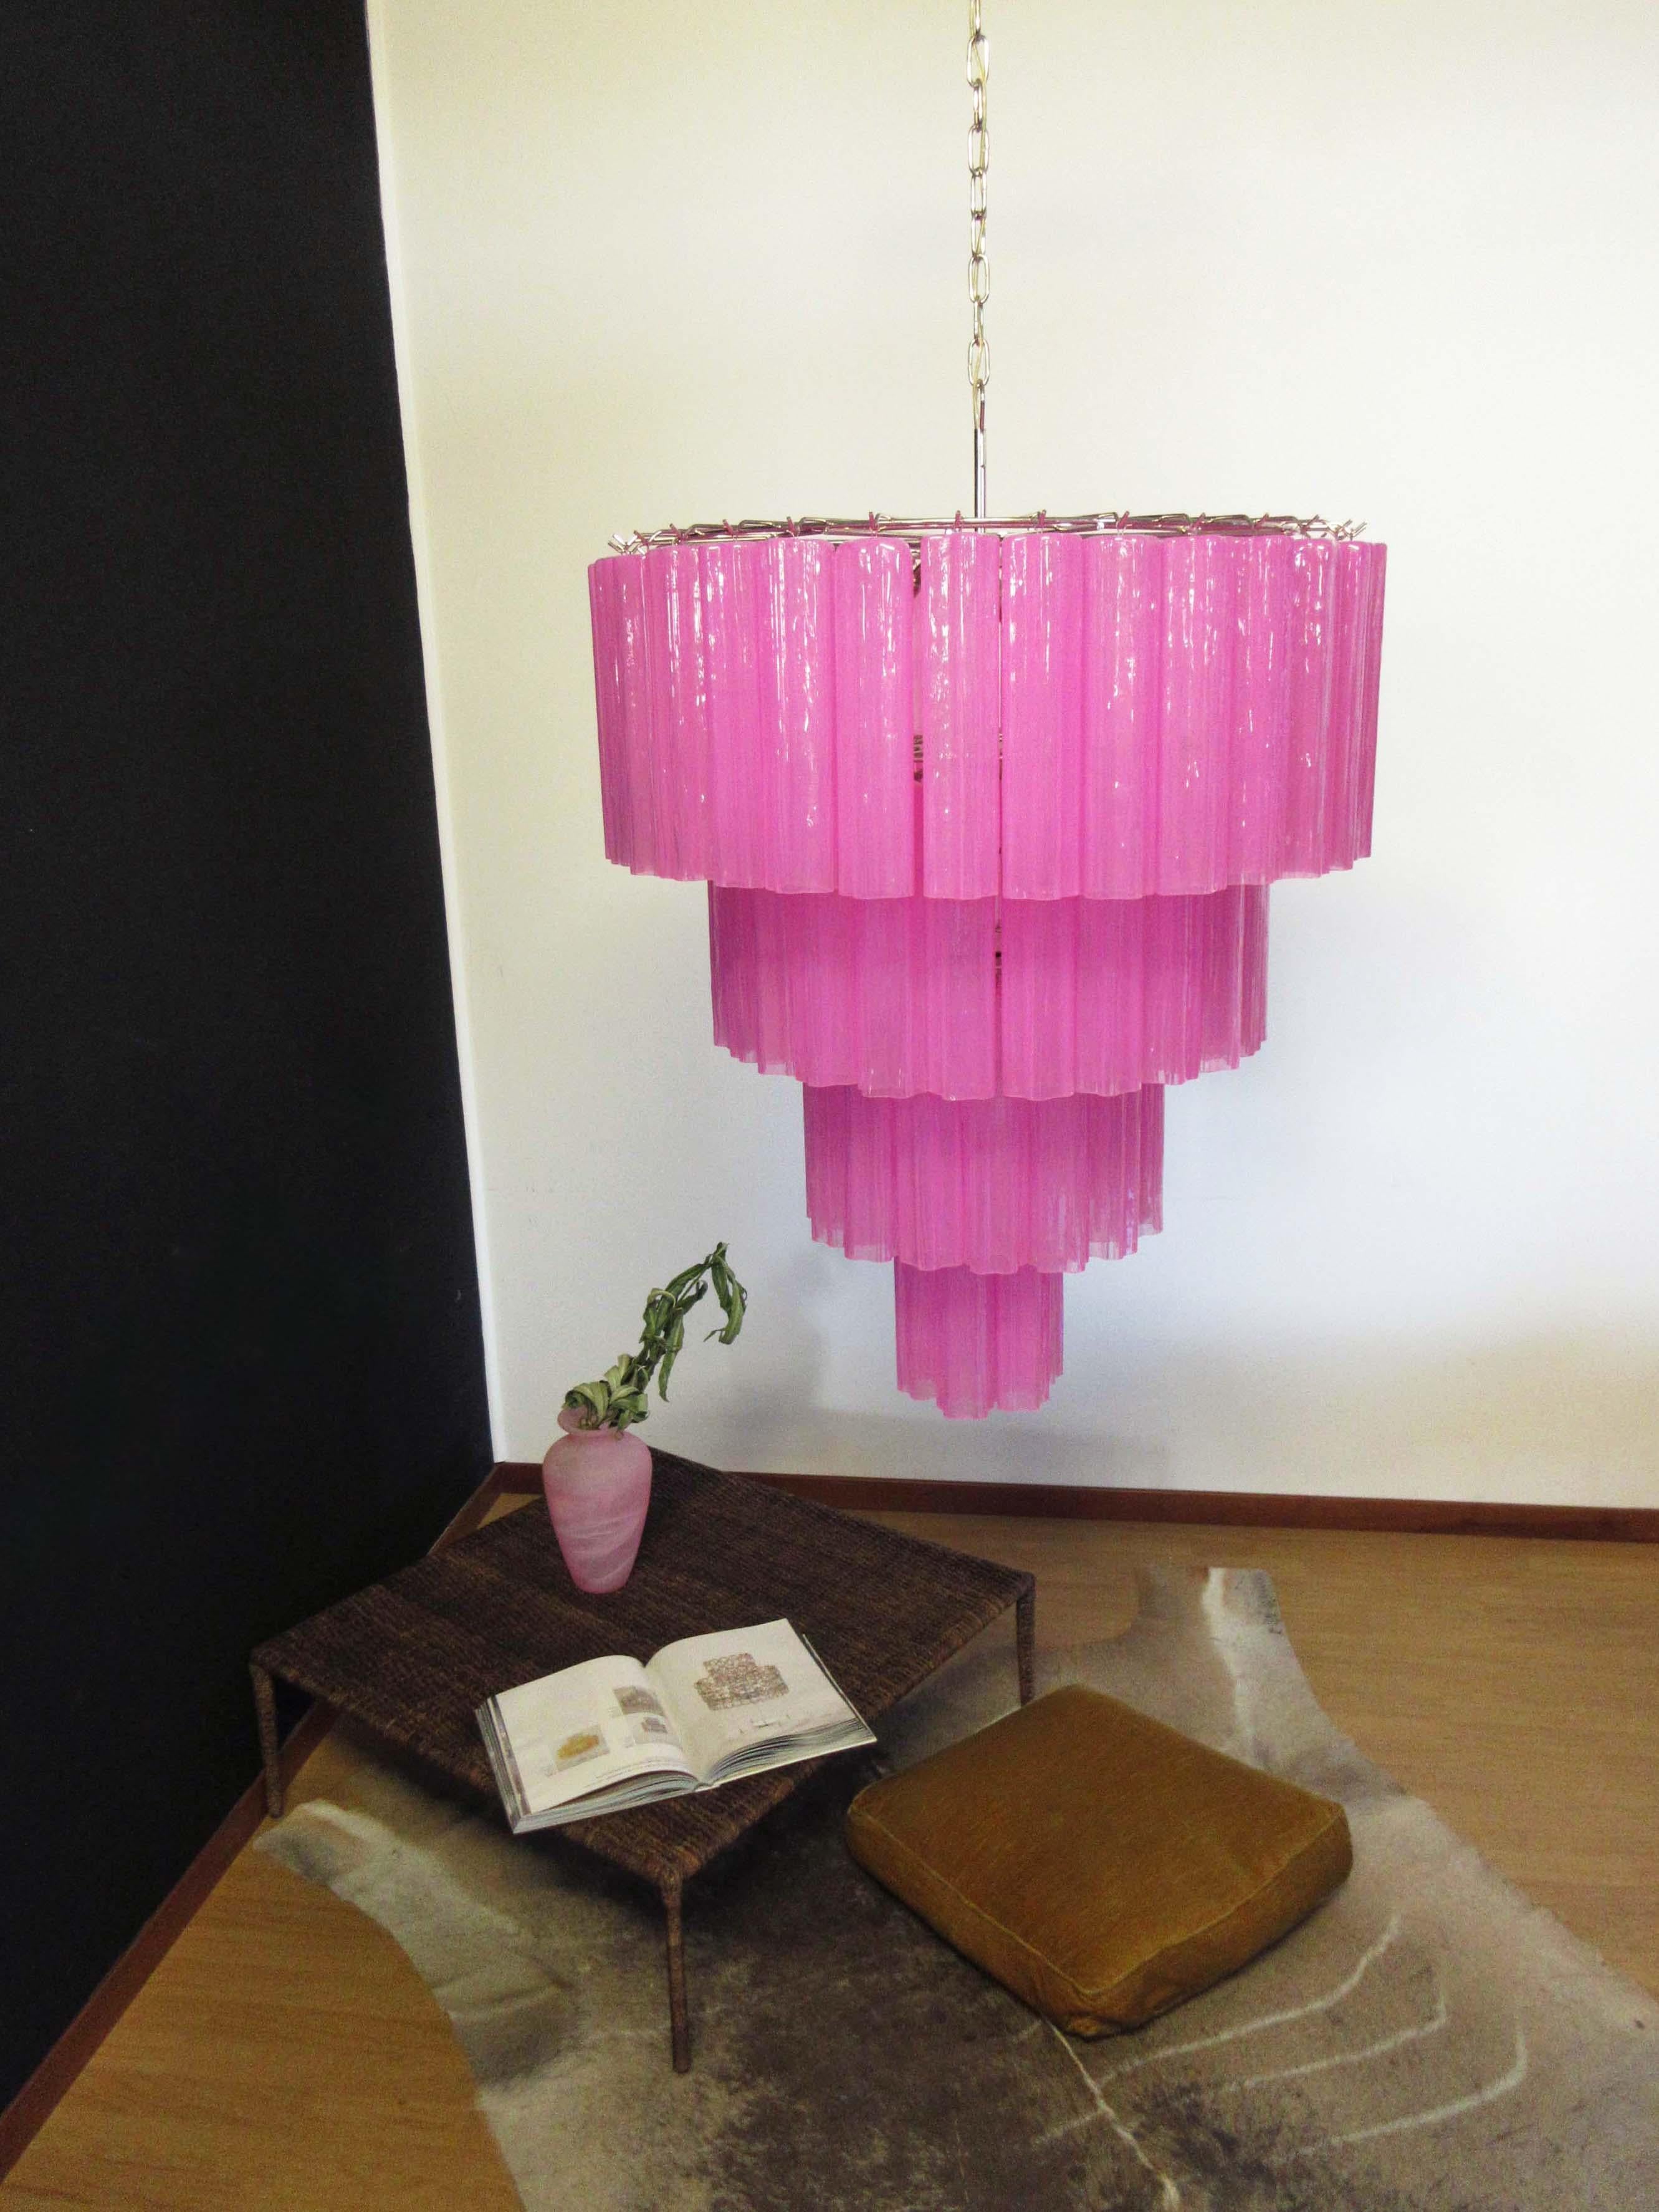 Mid-Century Modern Huge Vintage Murano Glass Tiered Chandelier - 78 glasses - pink fuxia silk